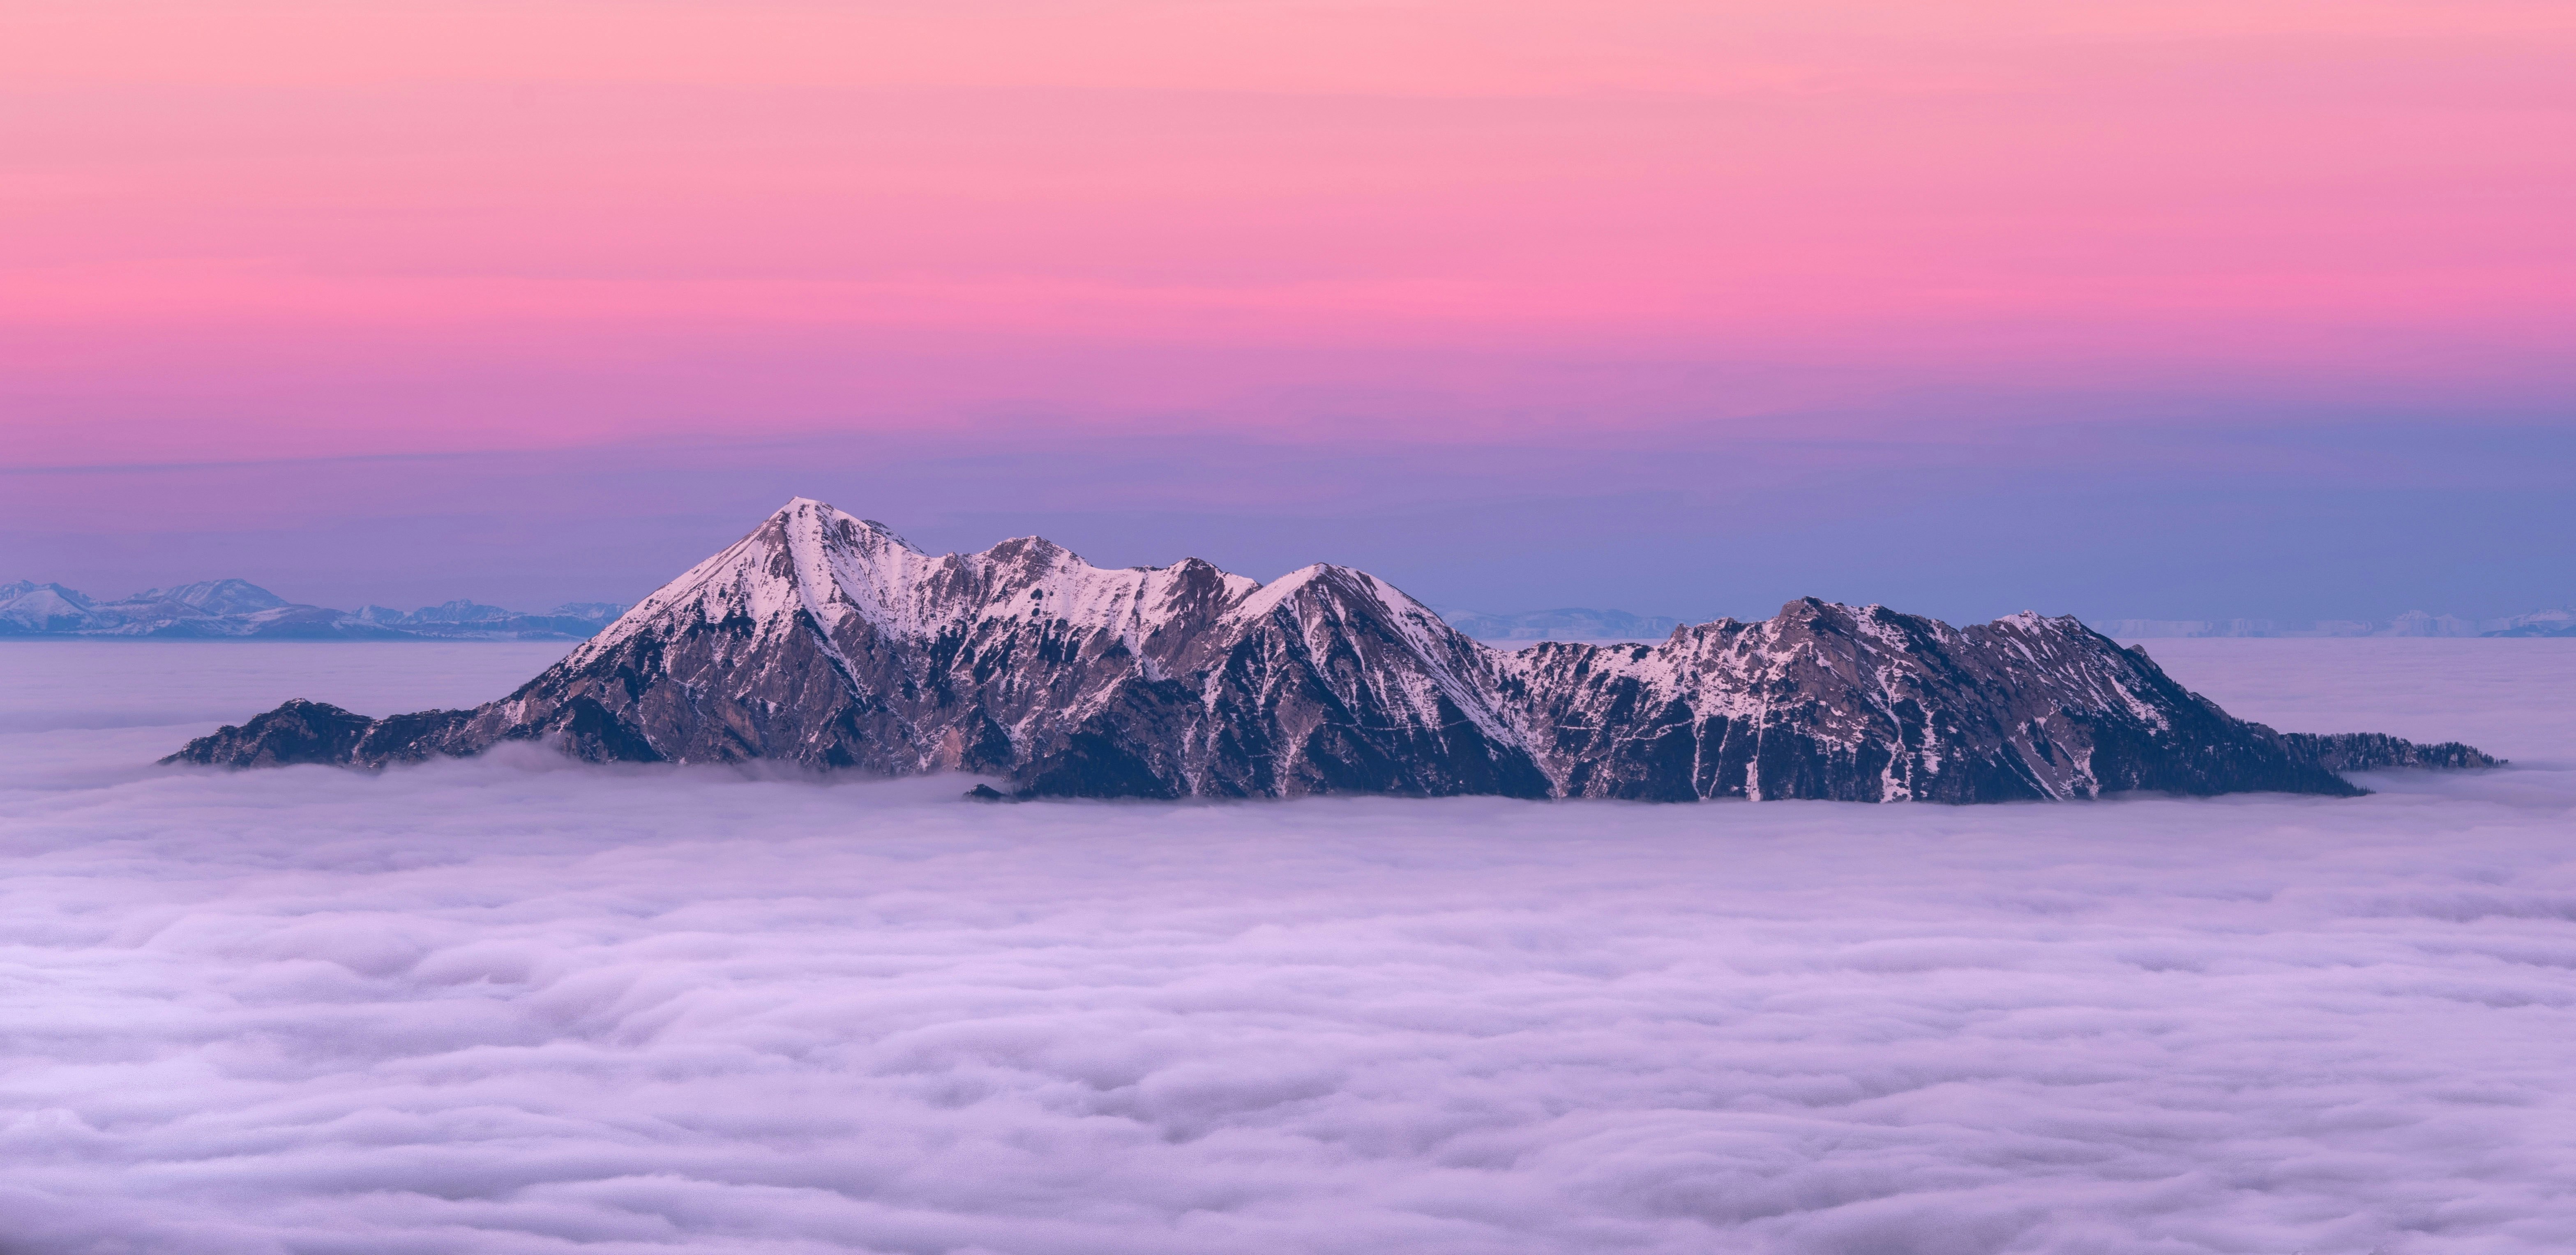 photo of snow-capped mountain surrounded by sea of clouds